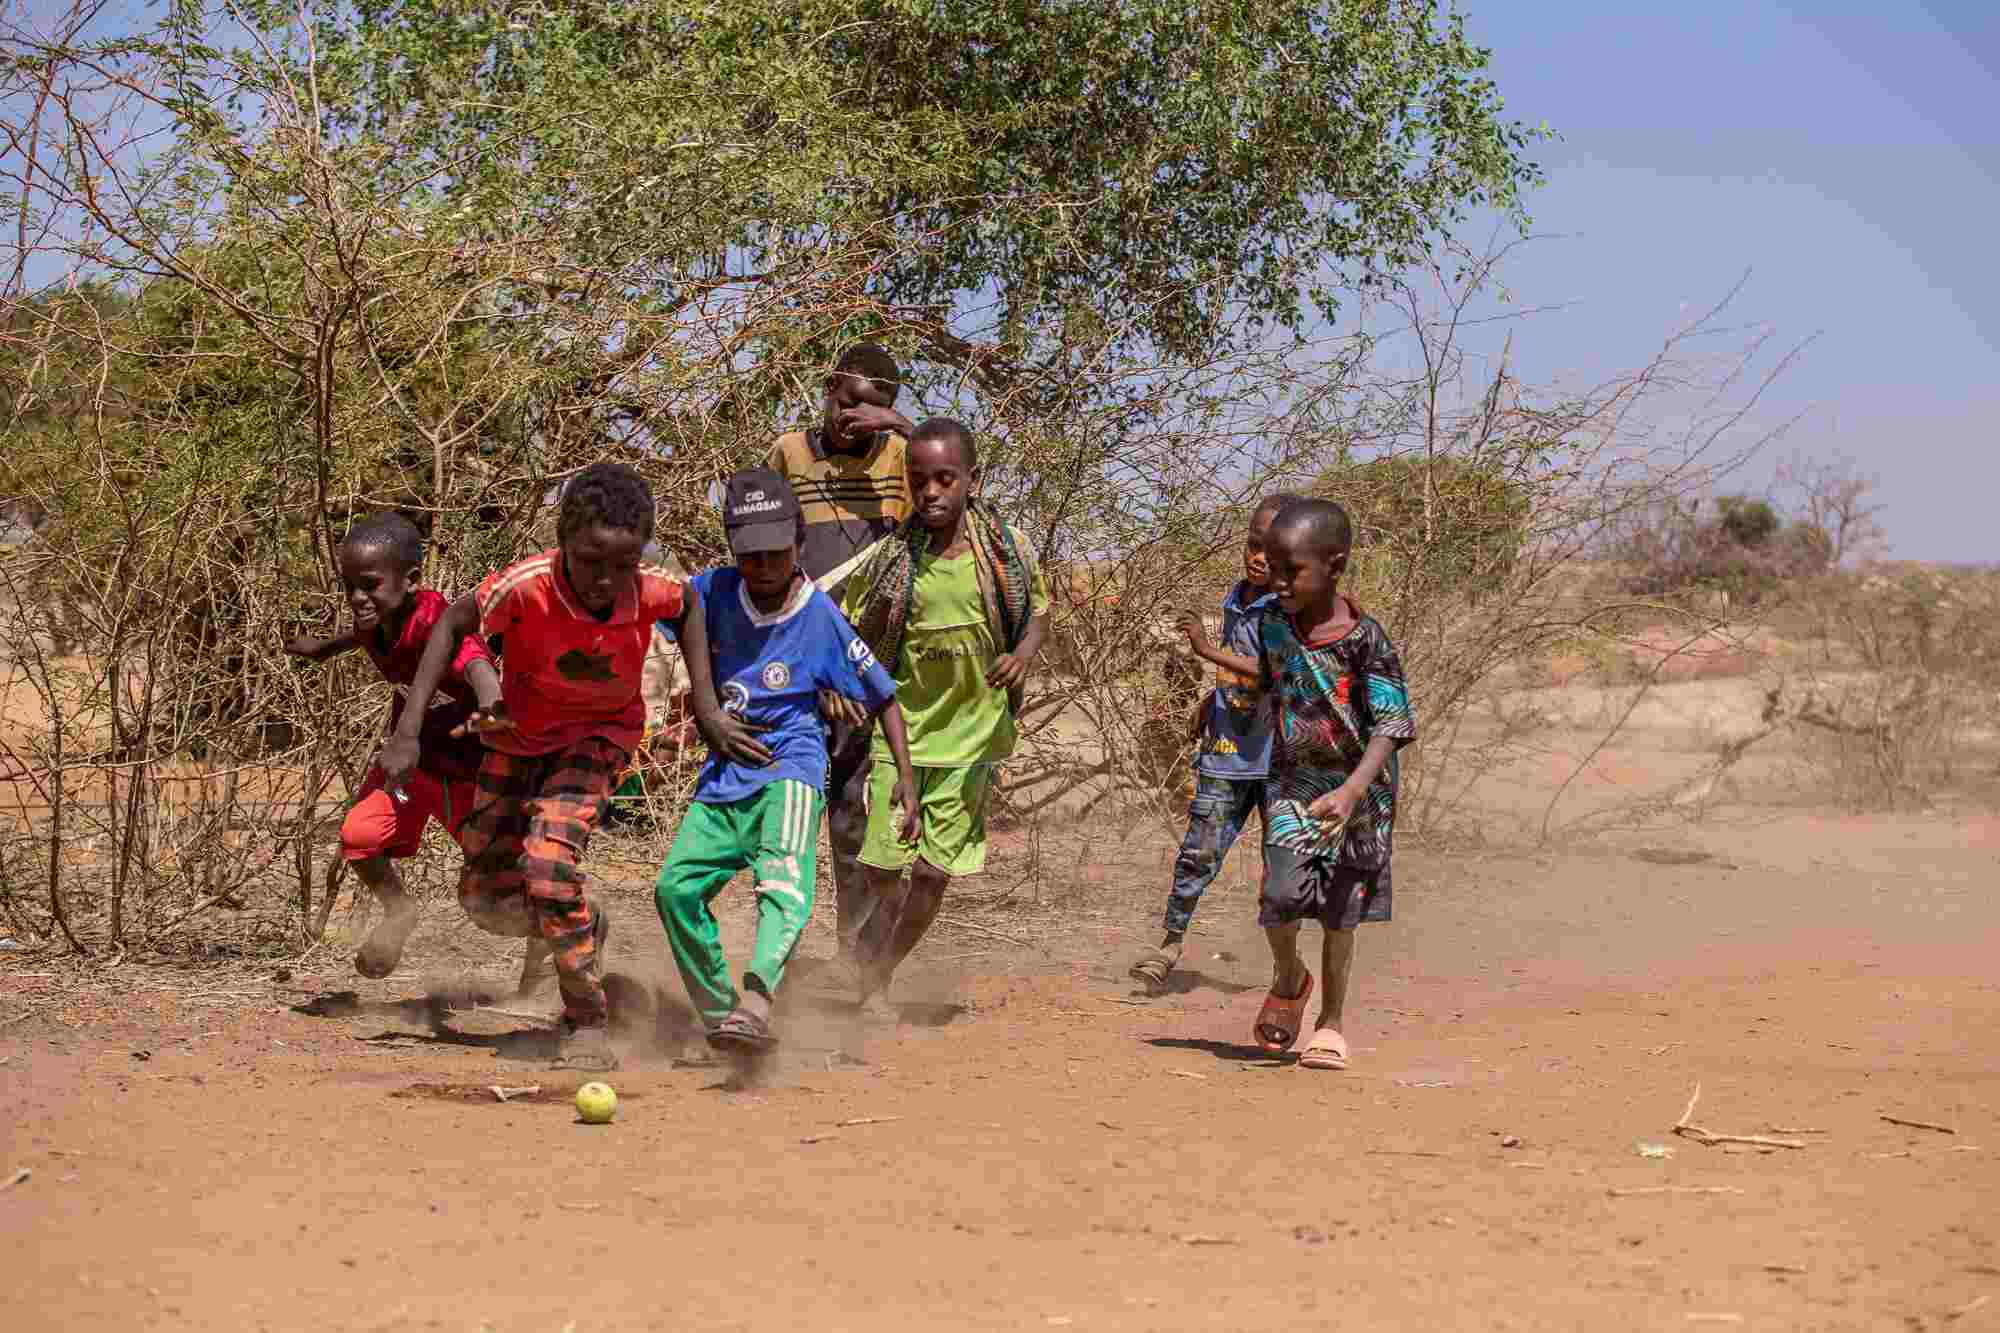 In Somalia, a group of boys play soccer with a small tennis ball on a dirt ground. 